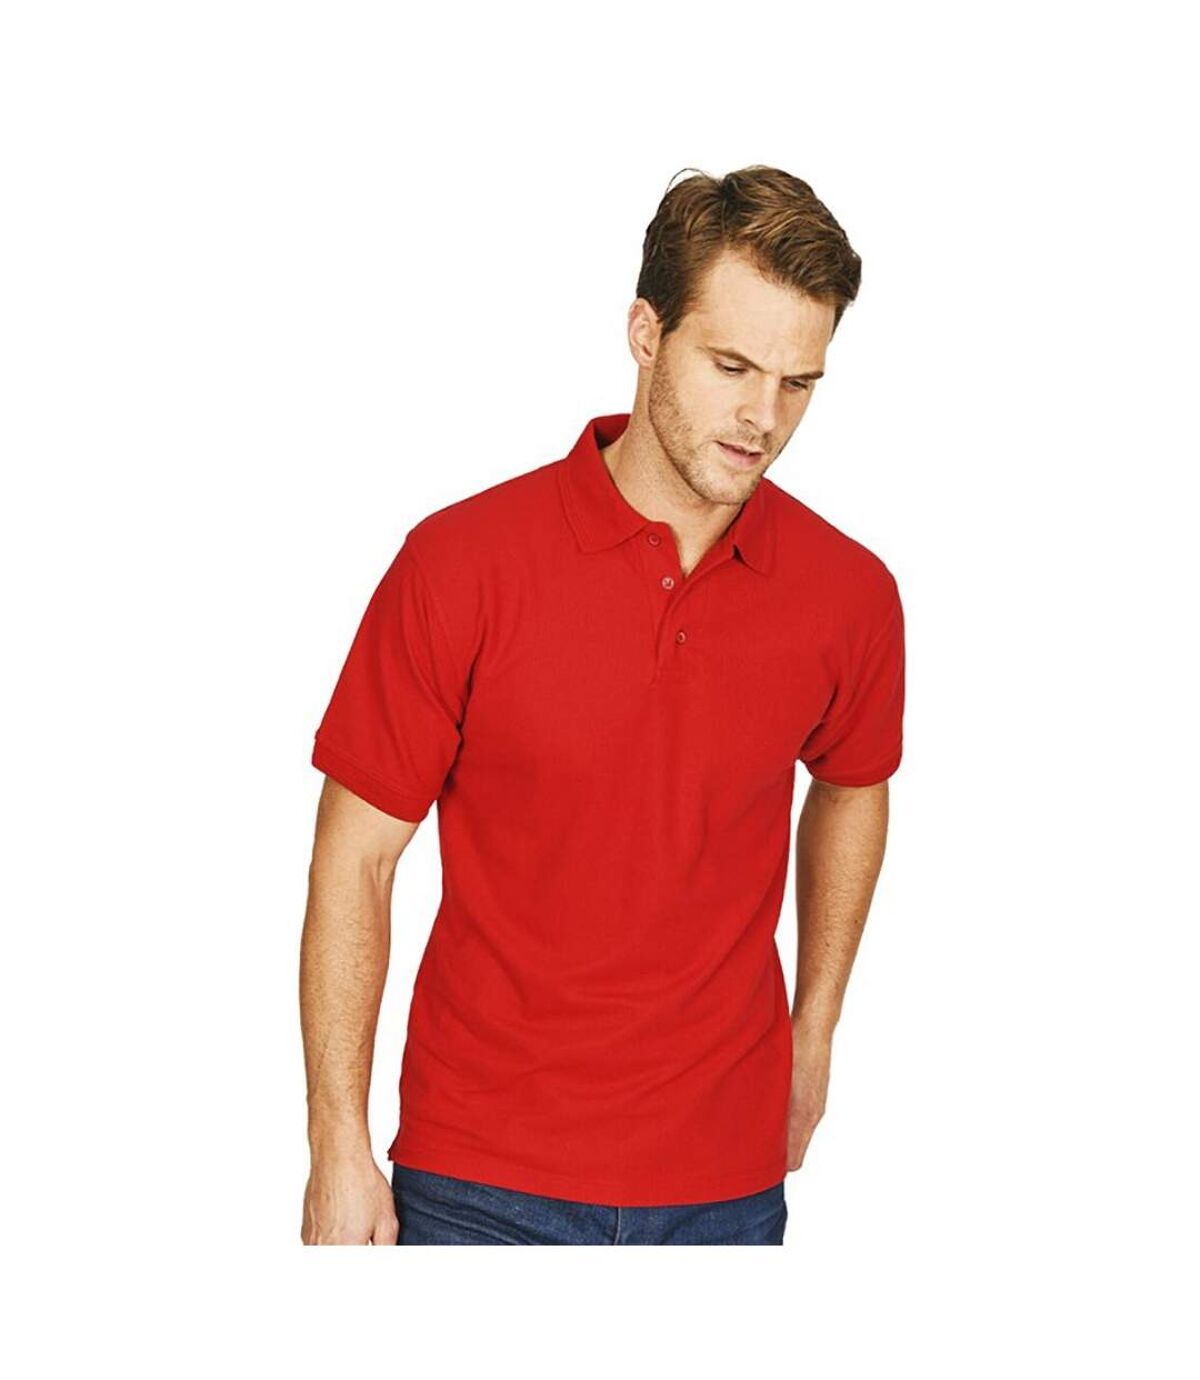 Absolute Apparel Mens Precision Polo (Red)